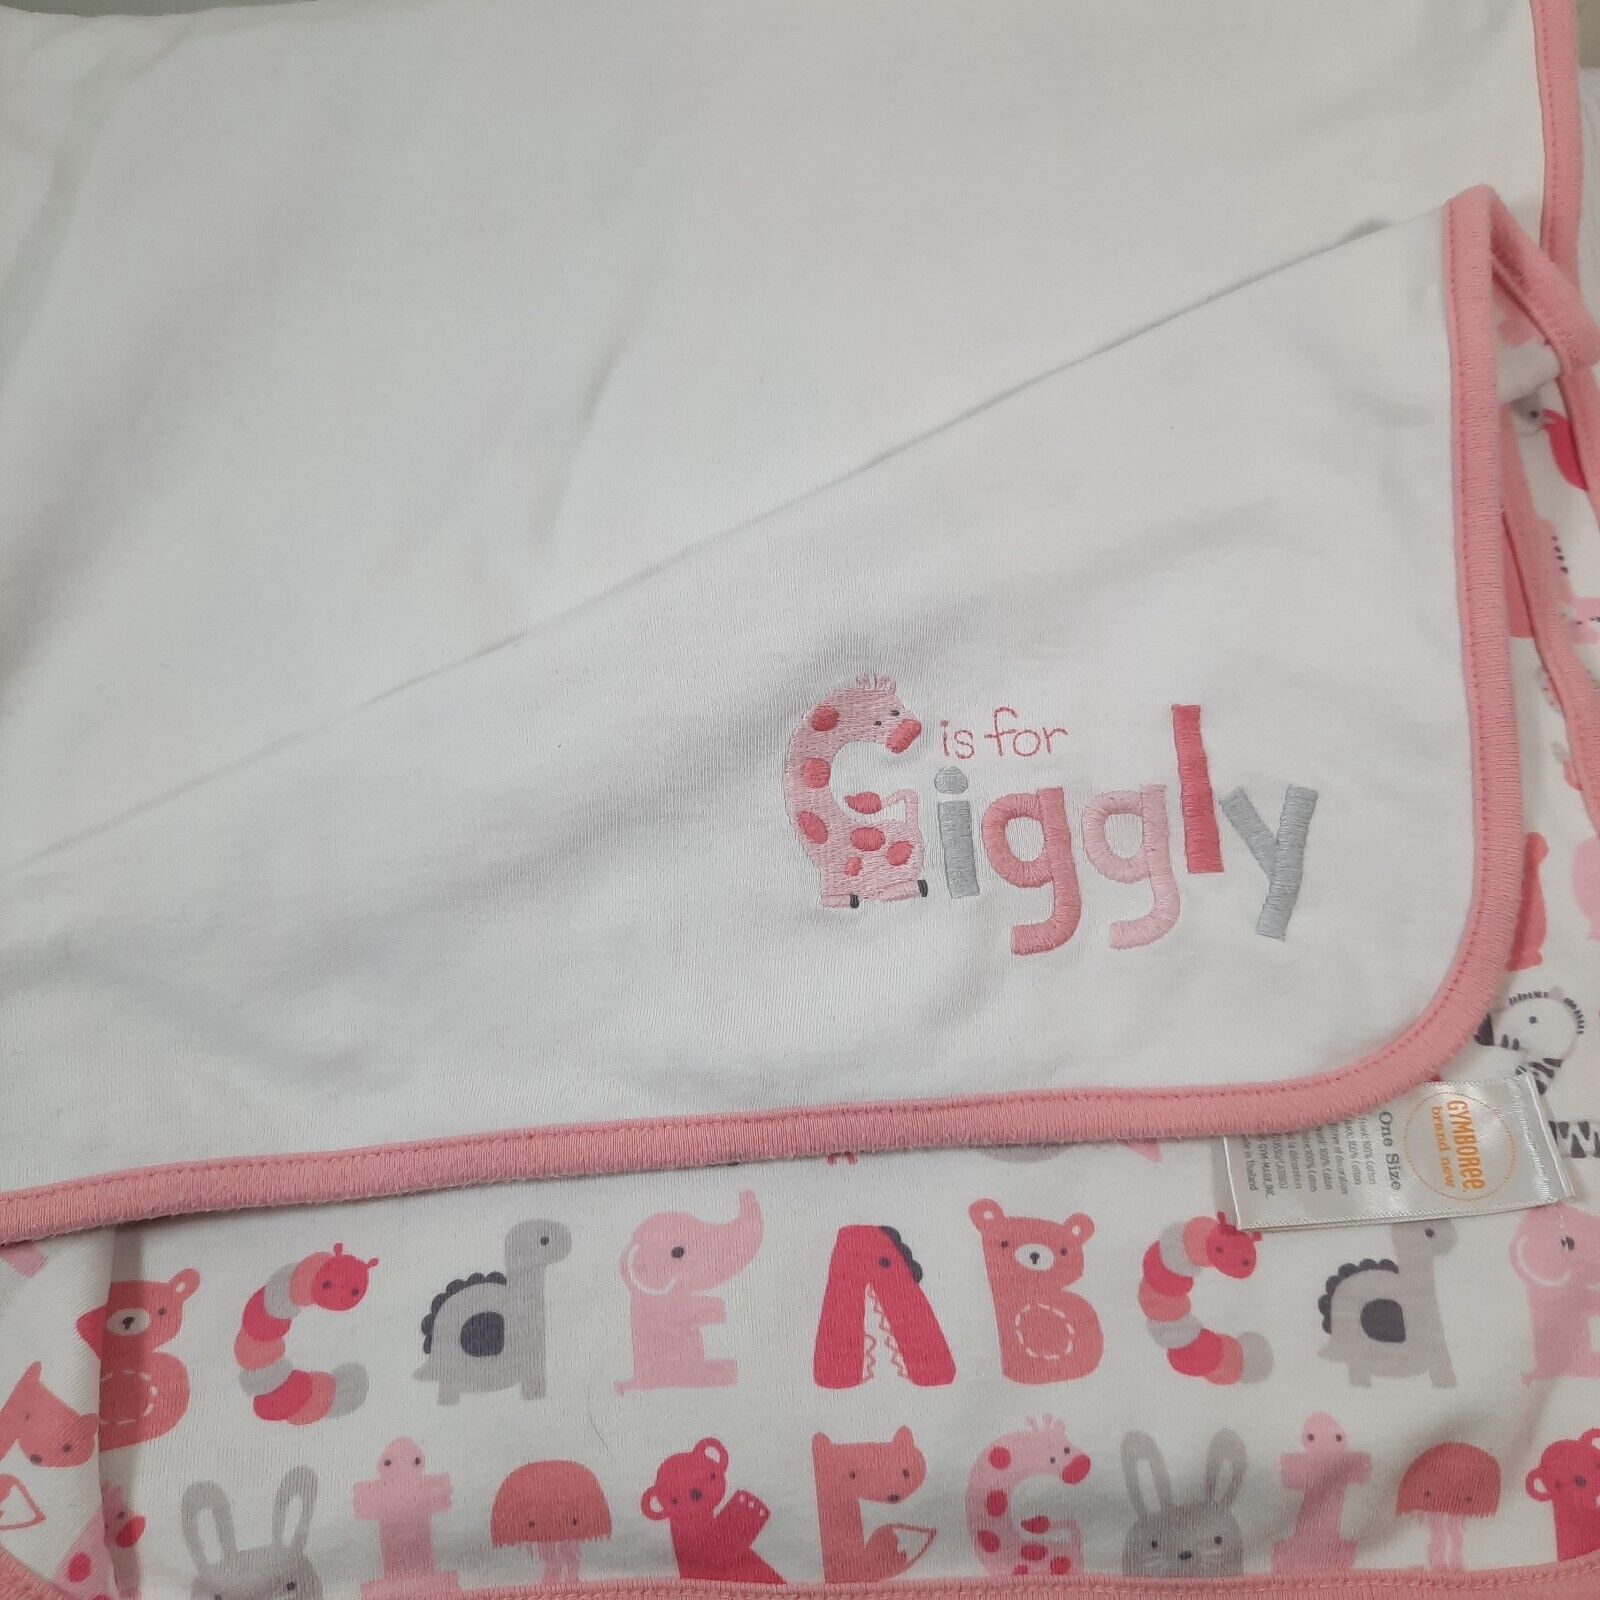 Primary image for Gymboree Baby Blanket G is for Giggly Giraffe Alphabet Animals Pink safari abcs